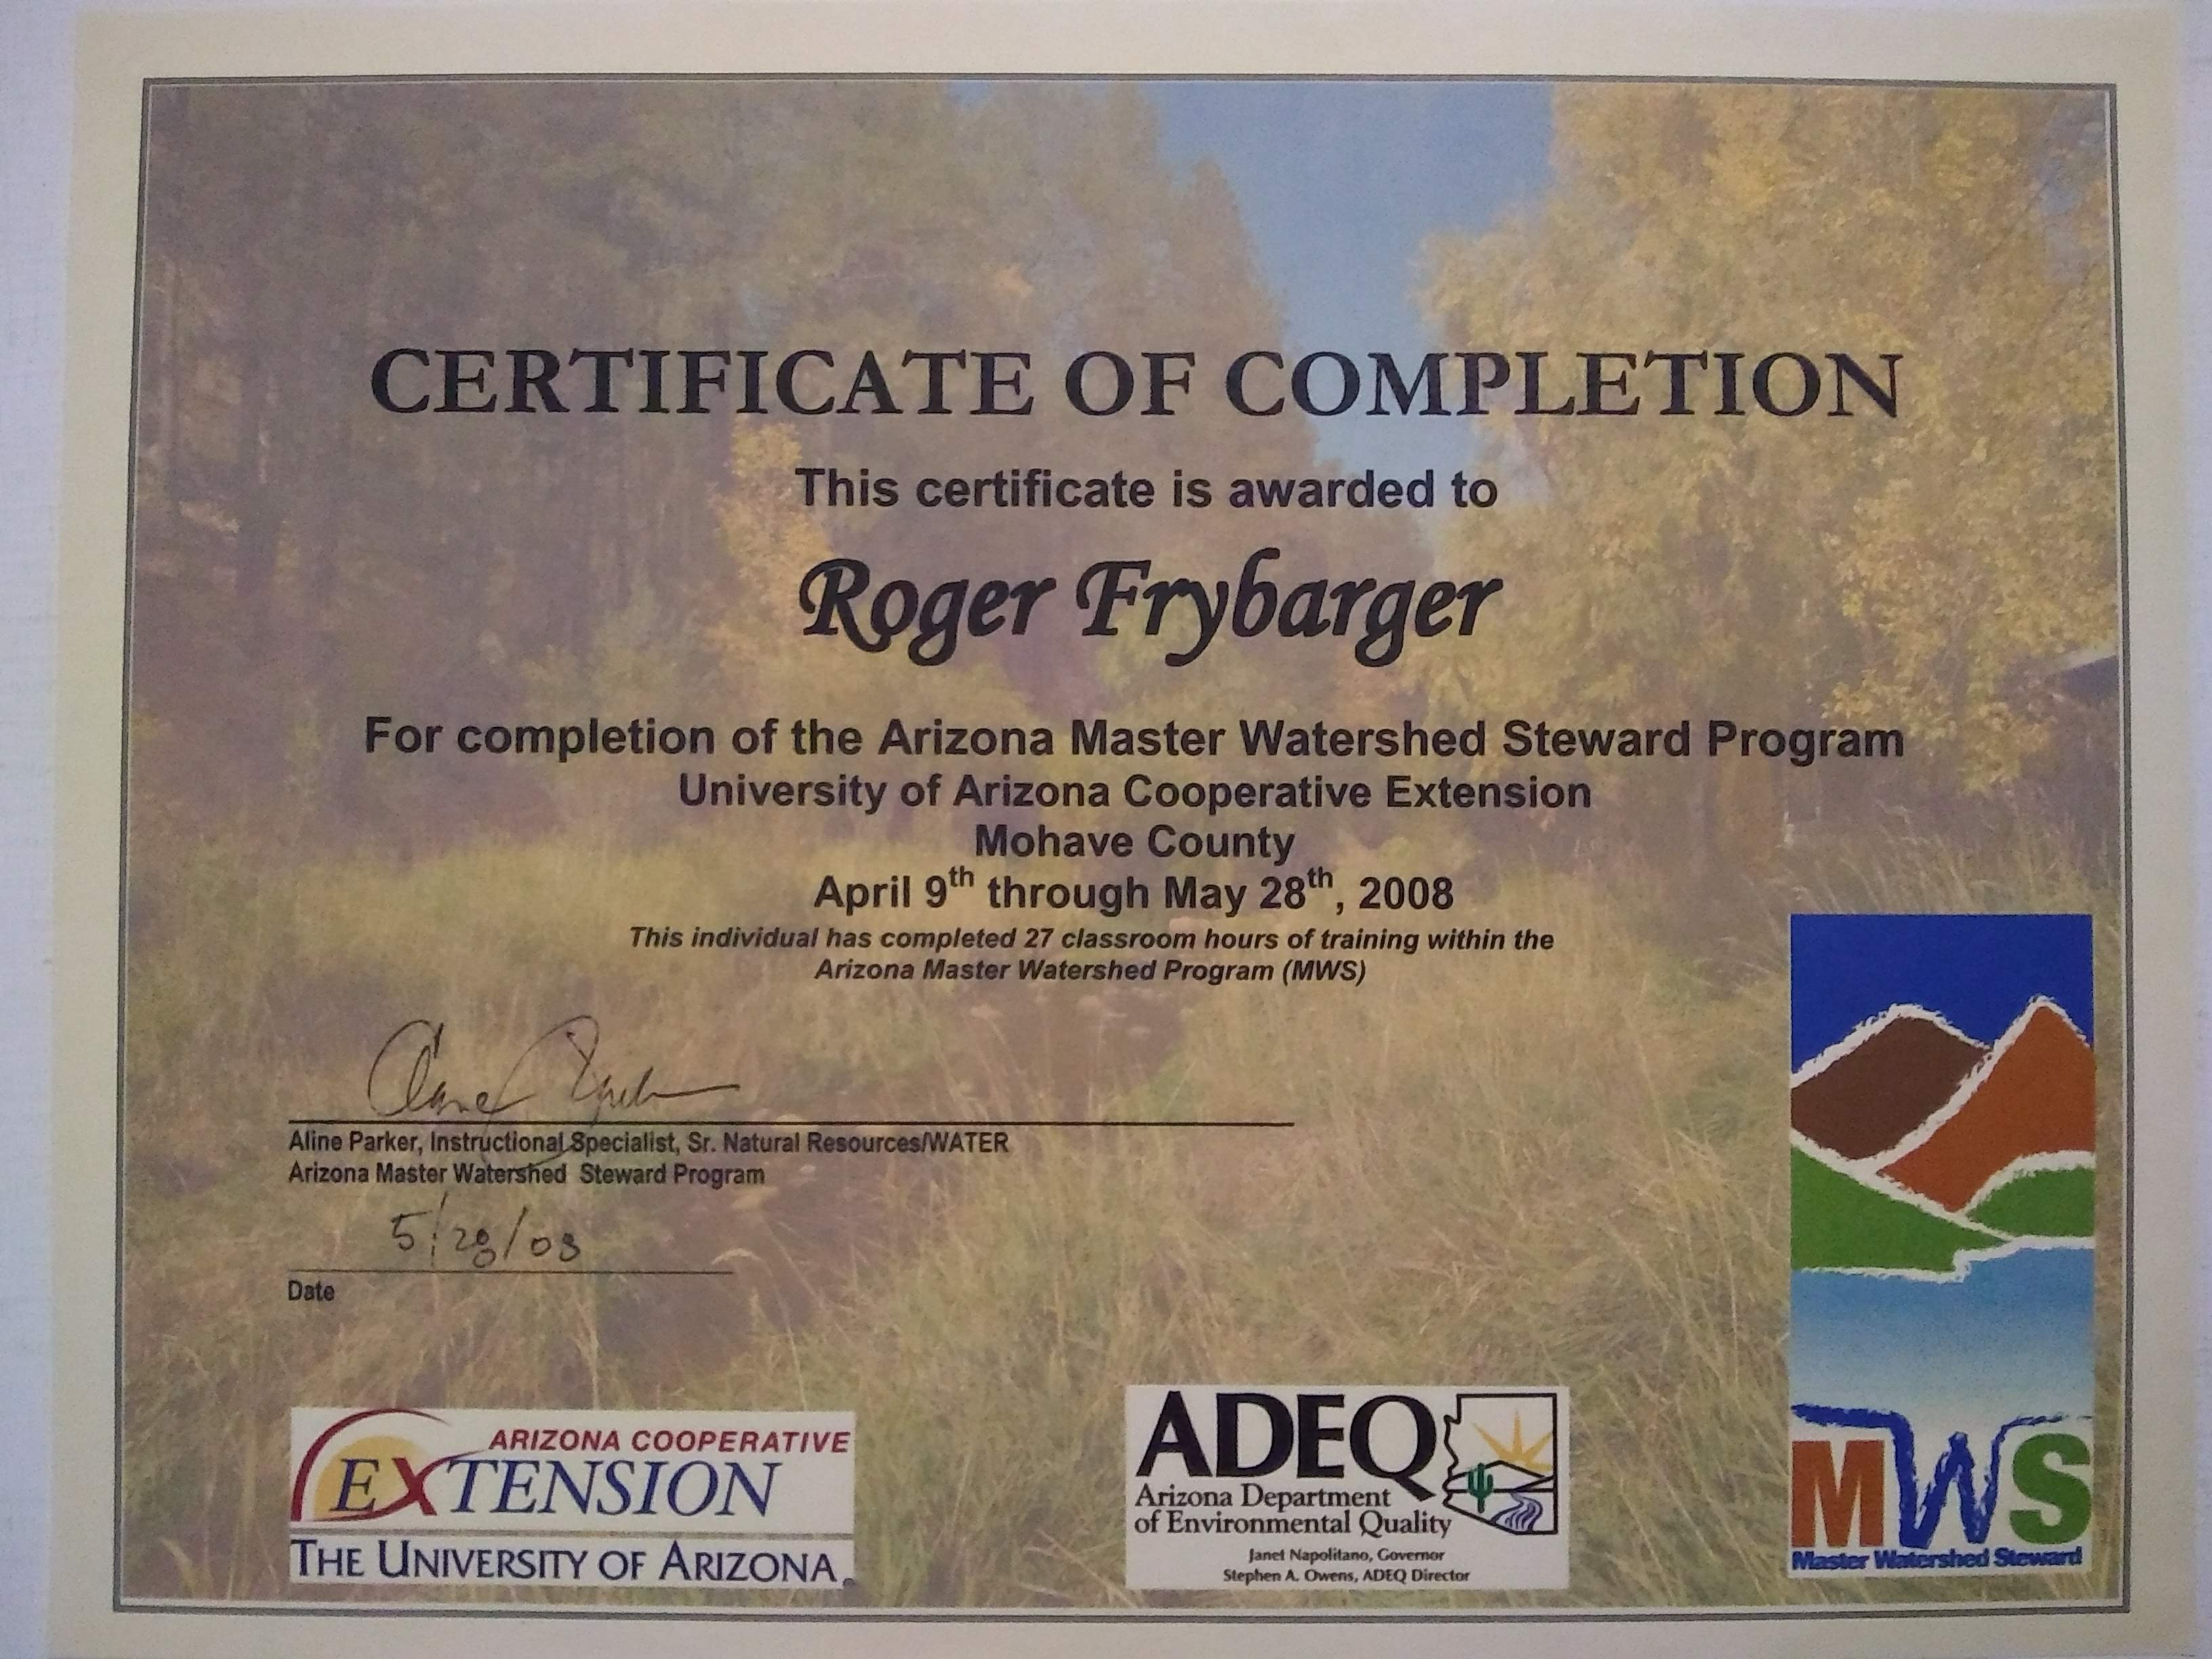 Roger’s Master Watershed Stewart Program Certificate of Completion.